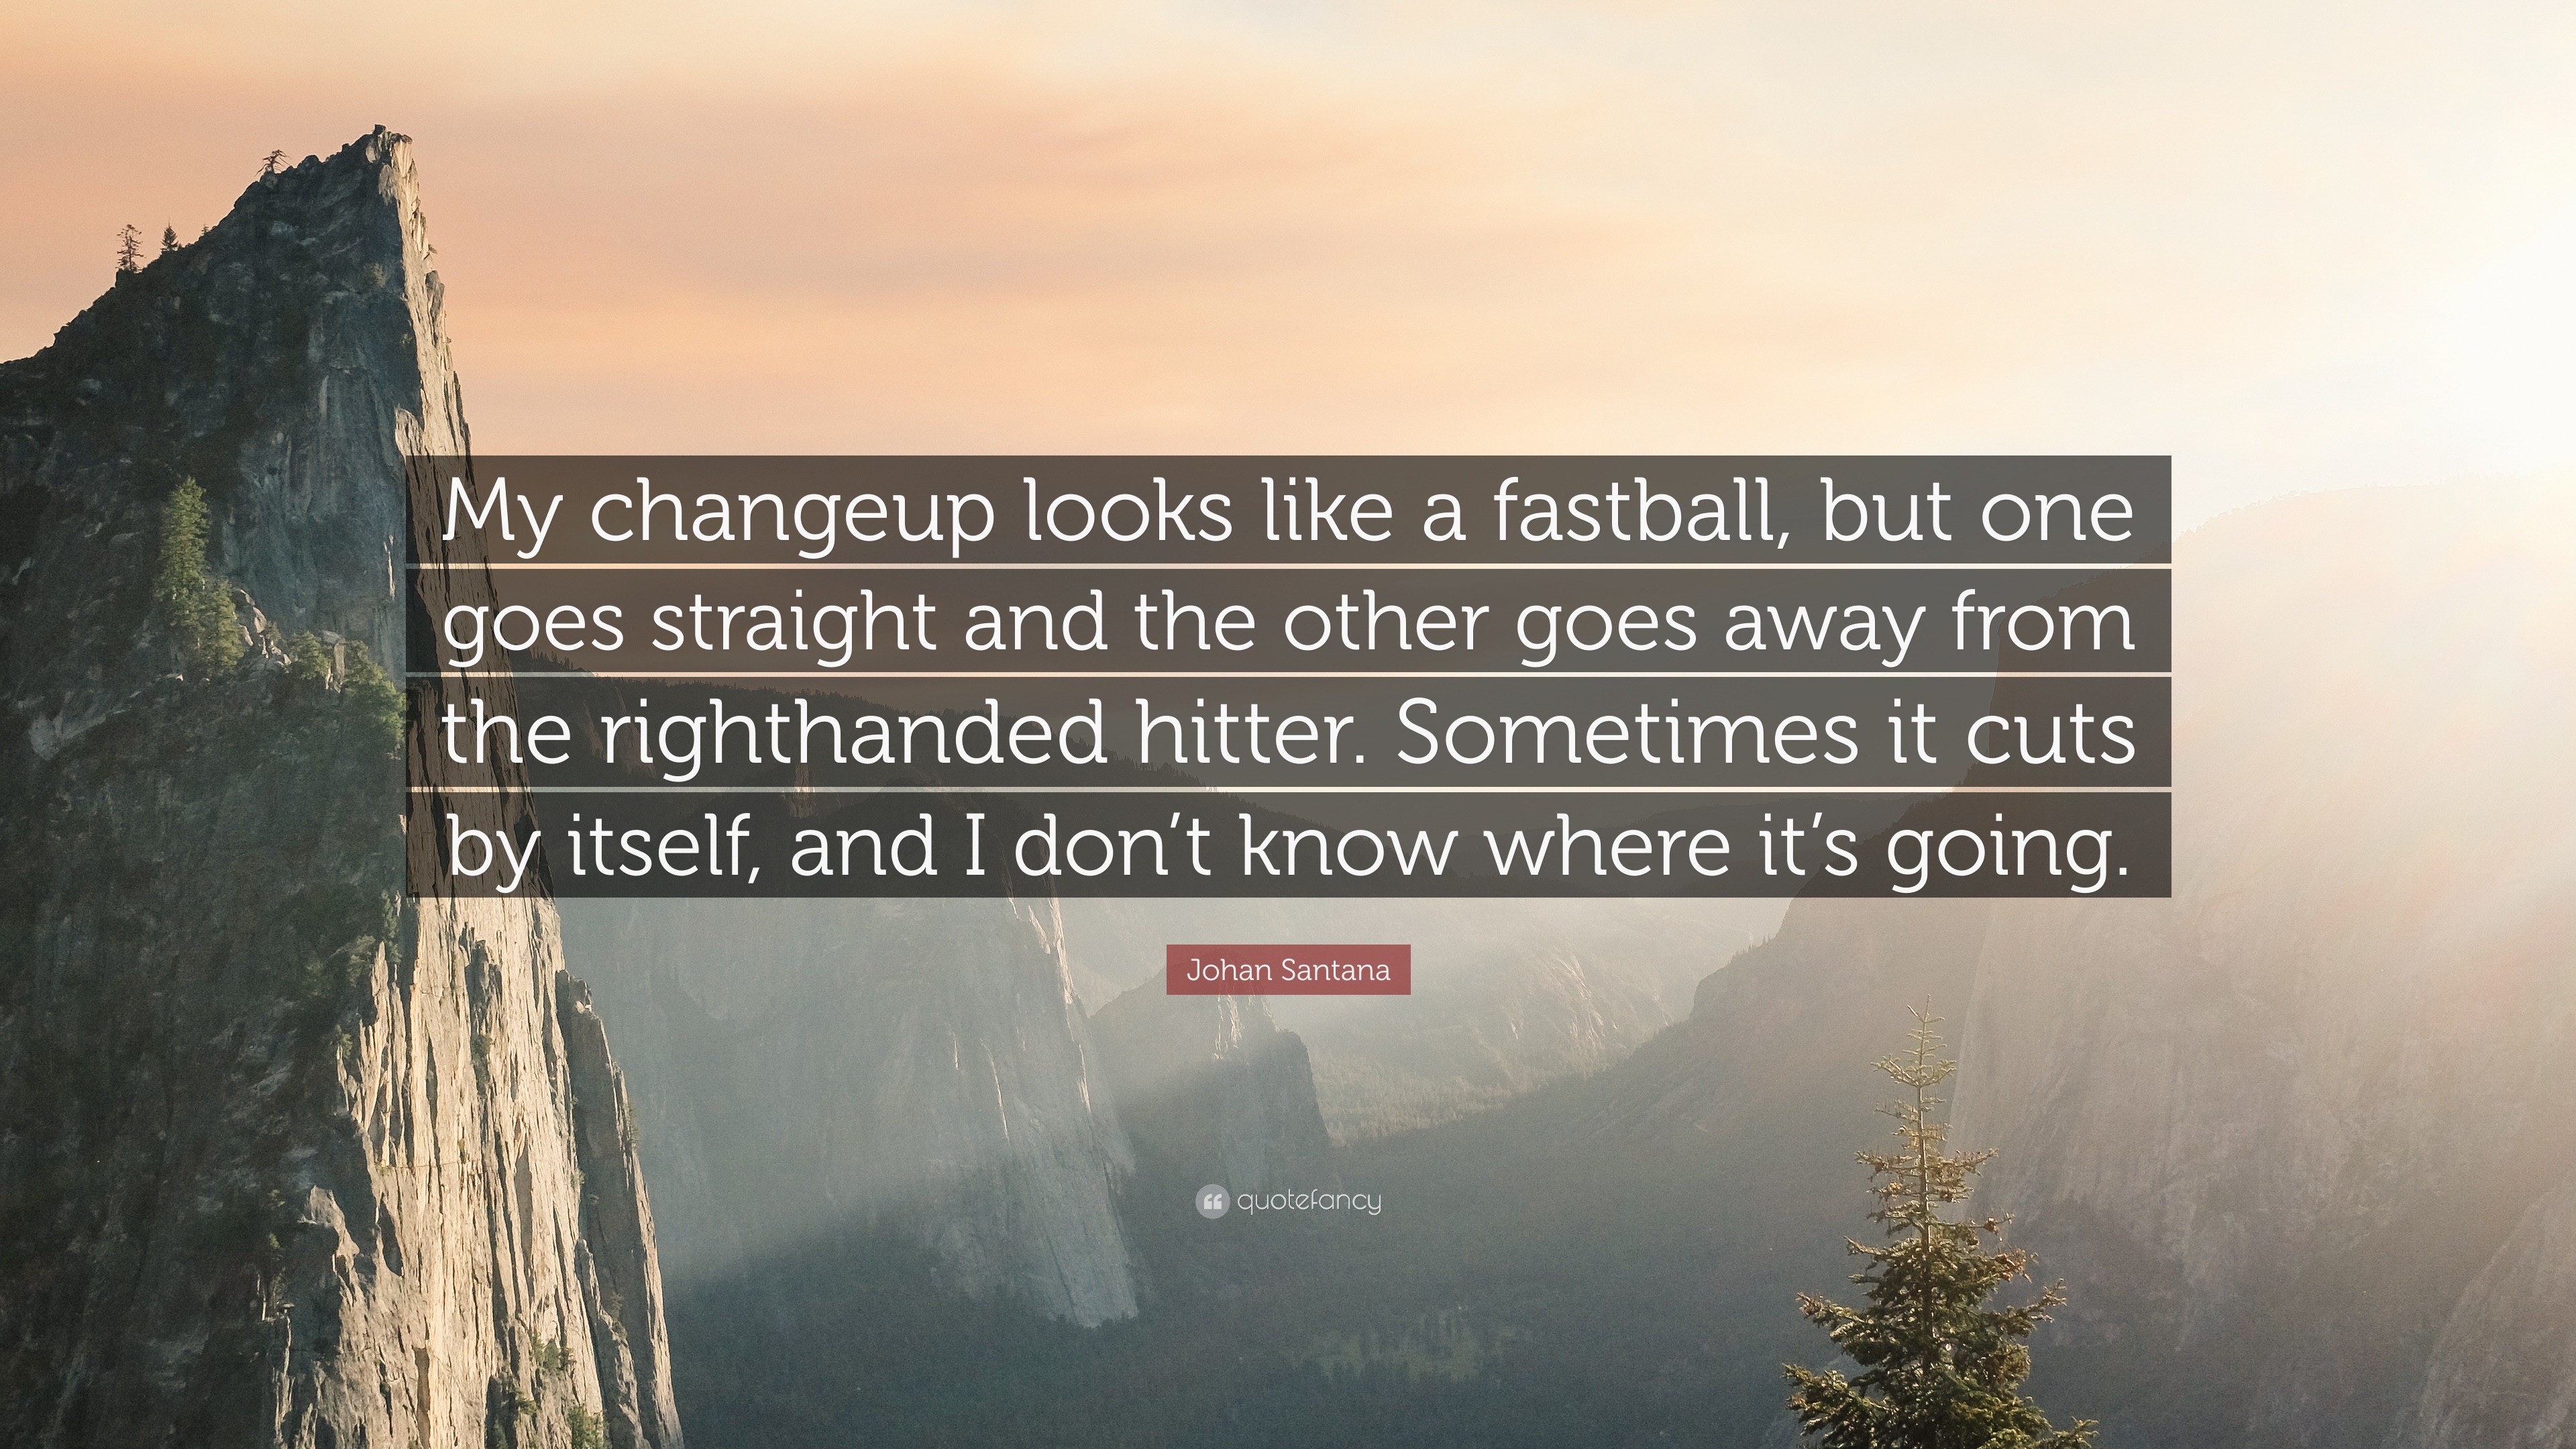 Johan Santana Quote: “My changeup looks like a fastball, but one goes  straight and the other goes away from the righthanded hitter. Sometimes ”